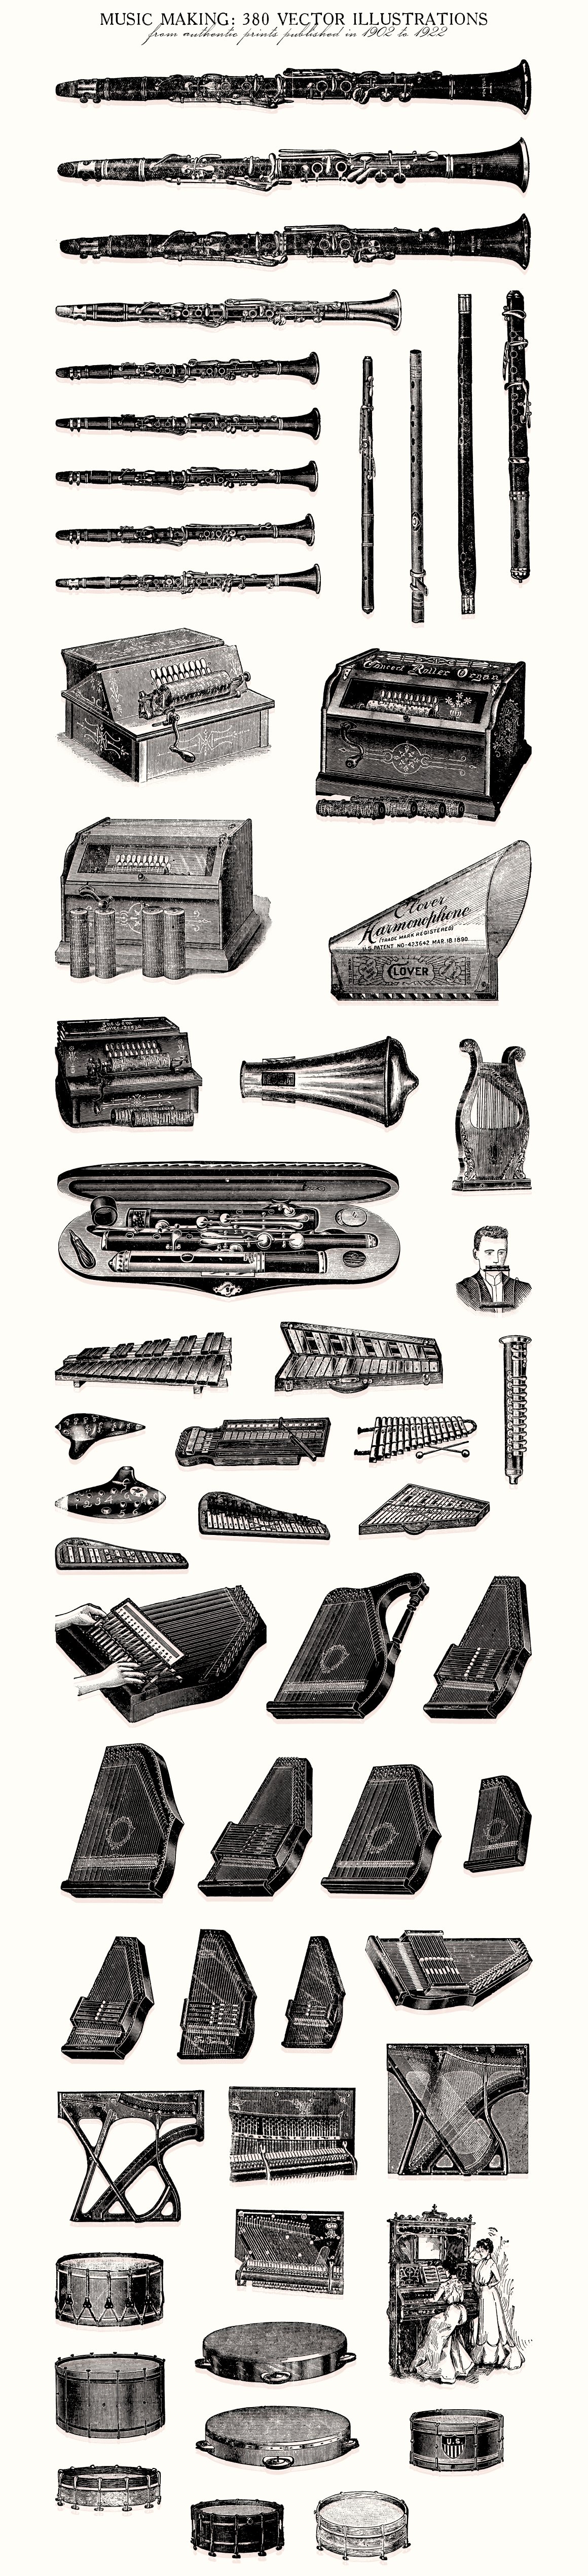 Collection of exquisite images of vintage musical instruments.